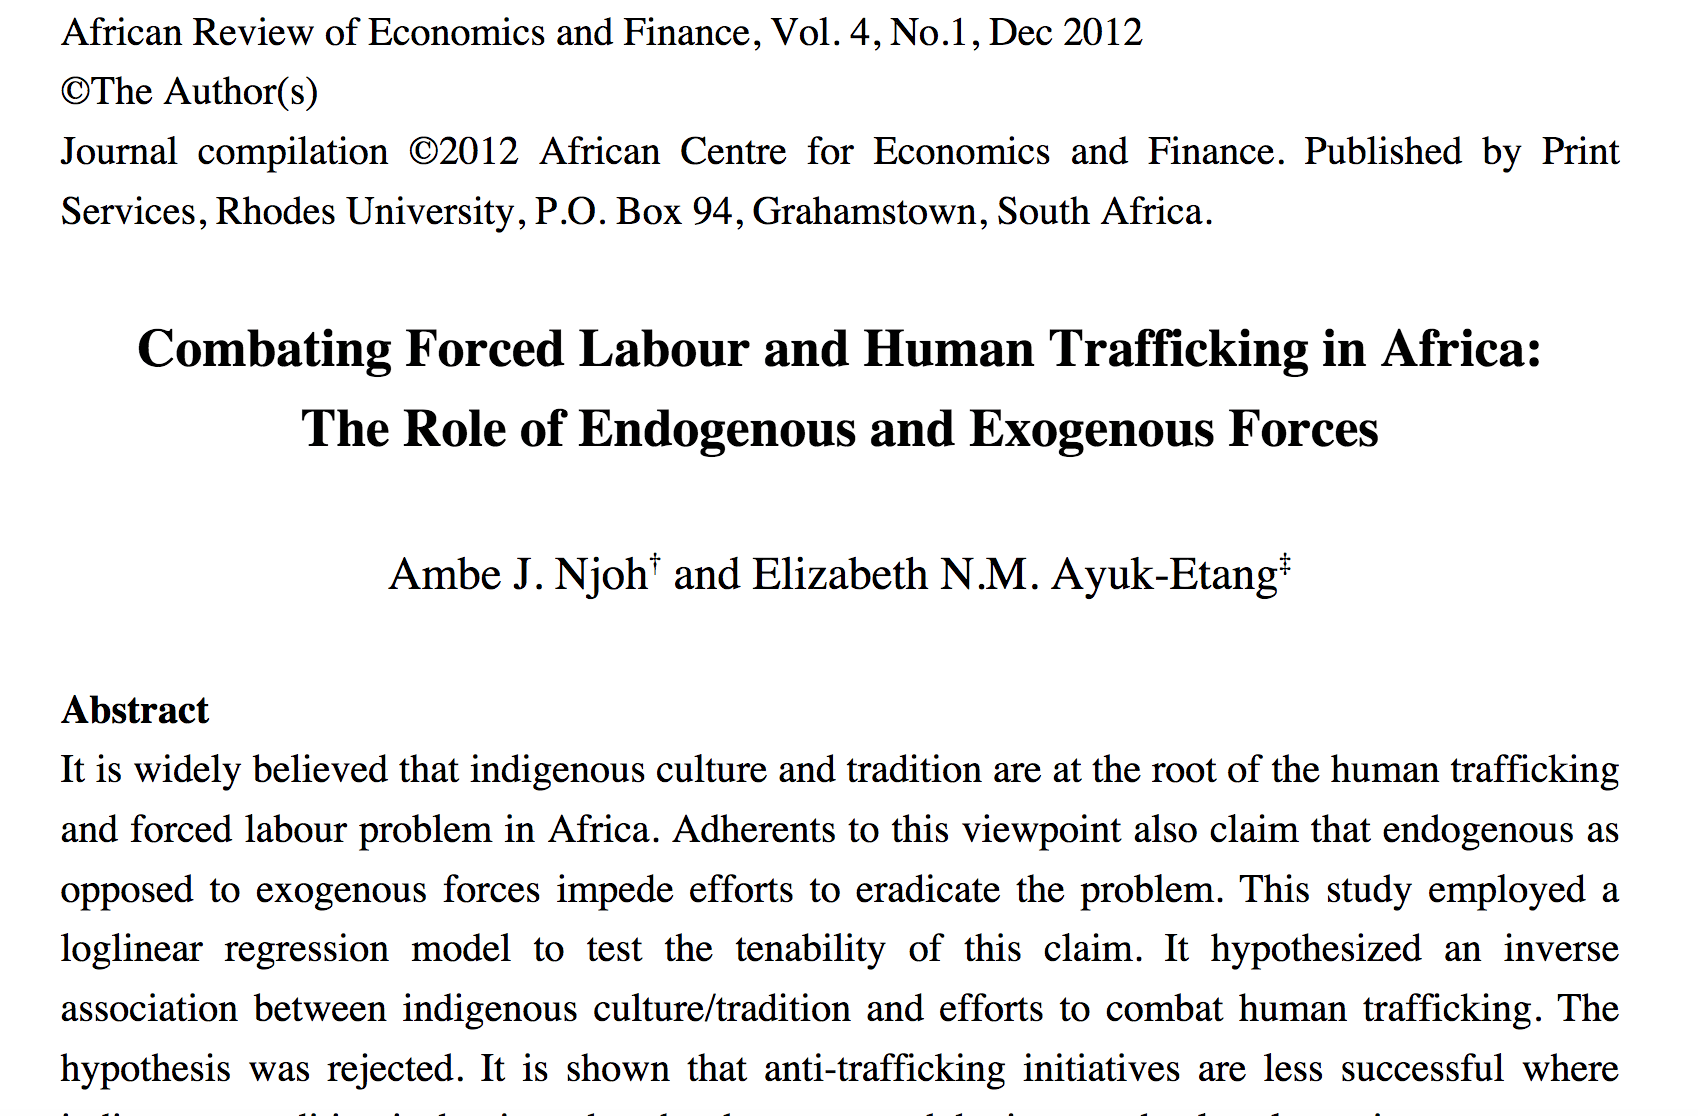 Combatting forced labor and human trafficking in Africa: The role of endogenous and exogenous forces